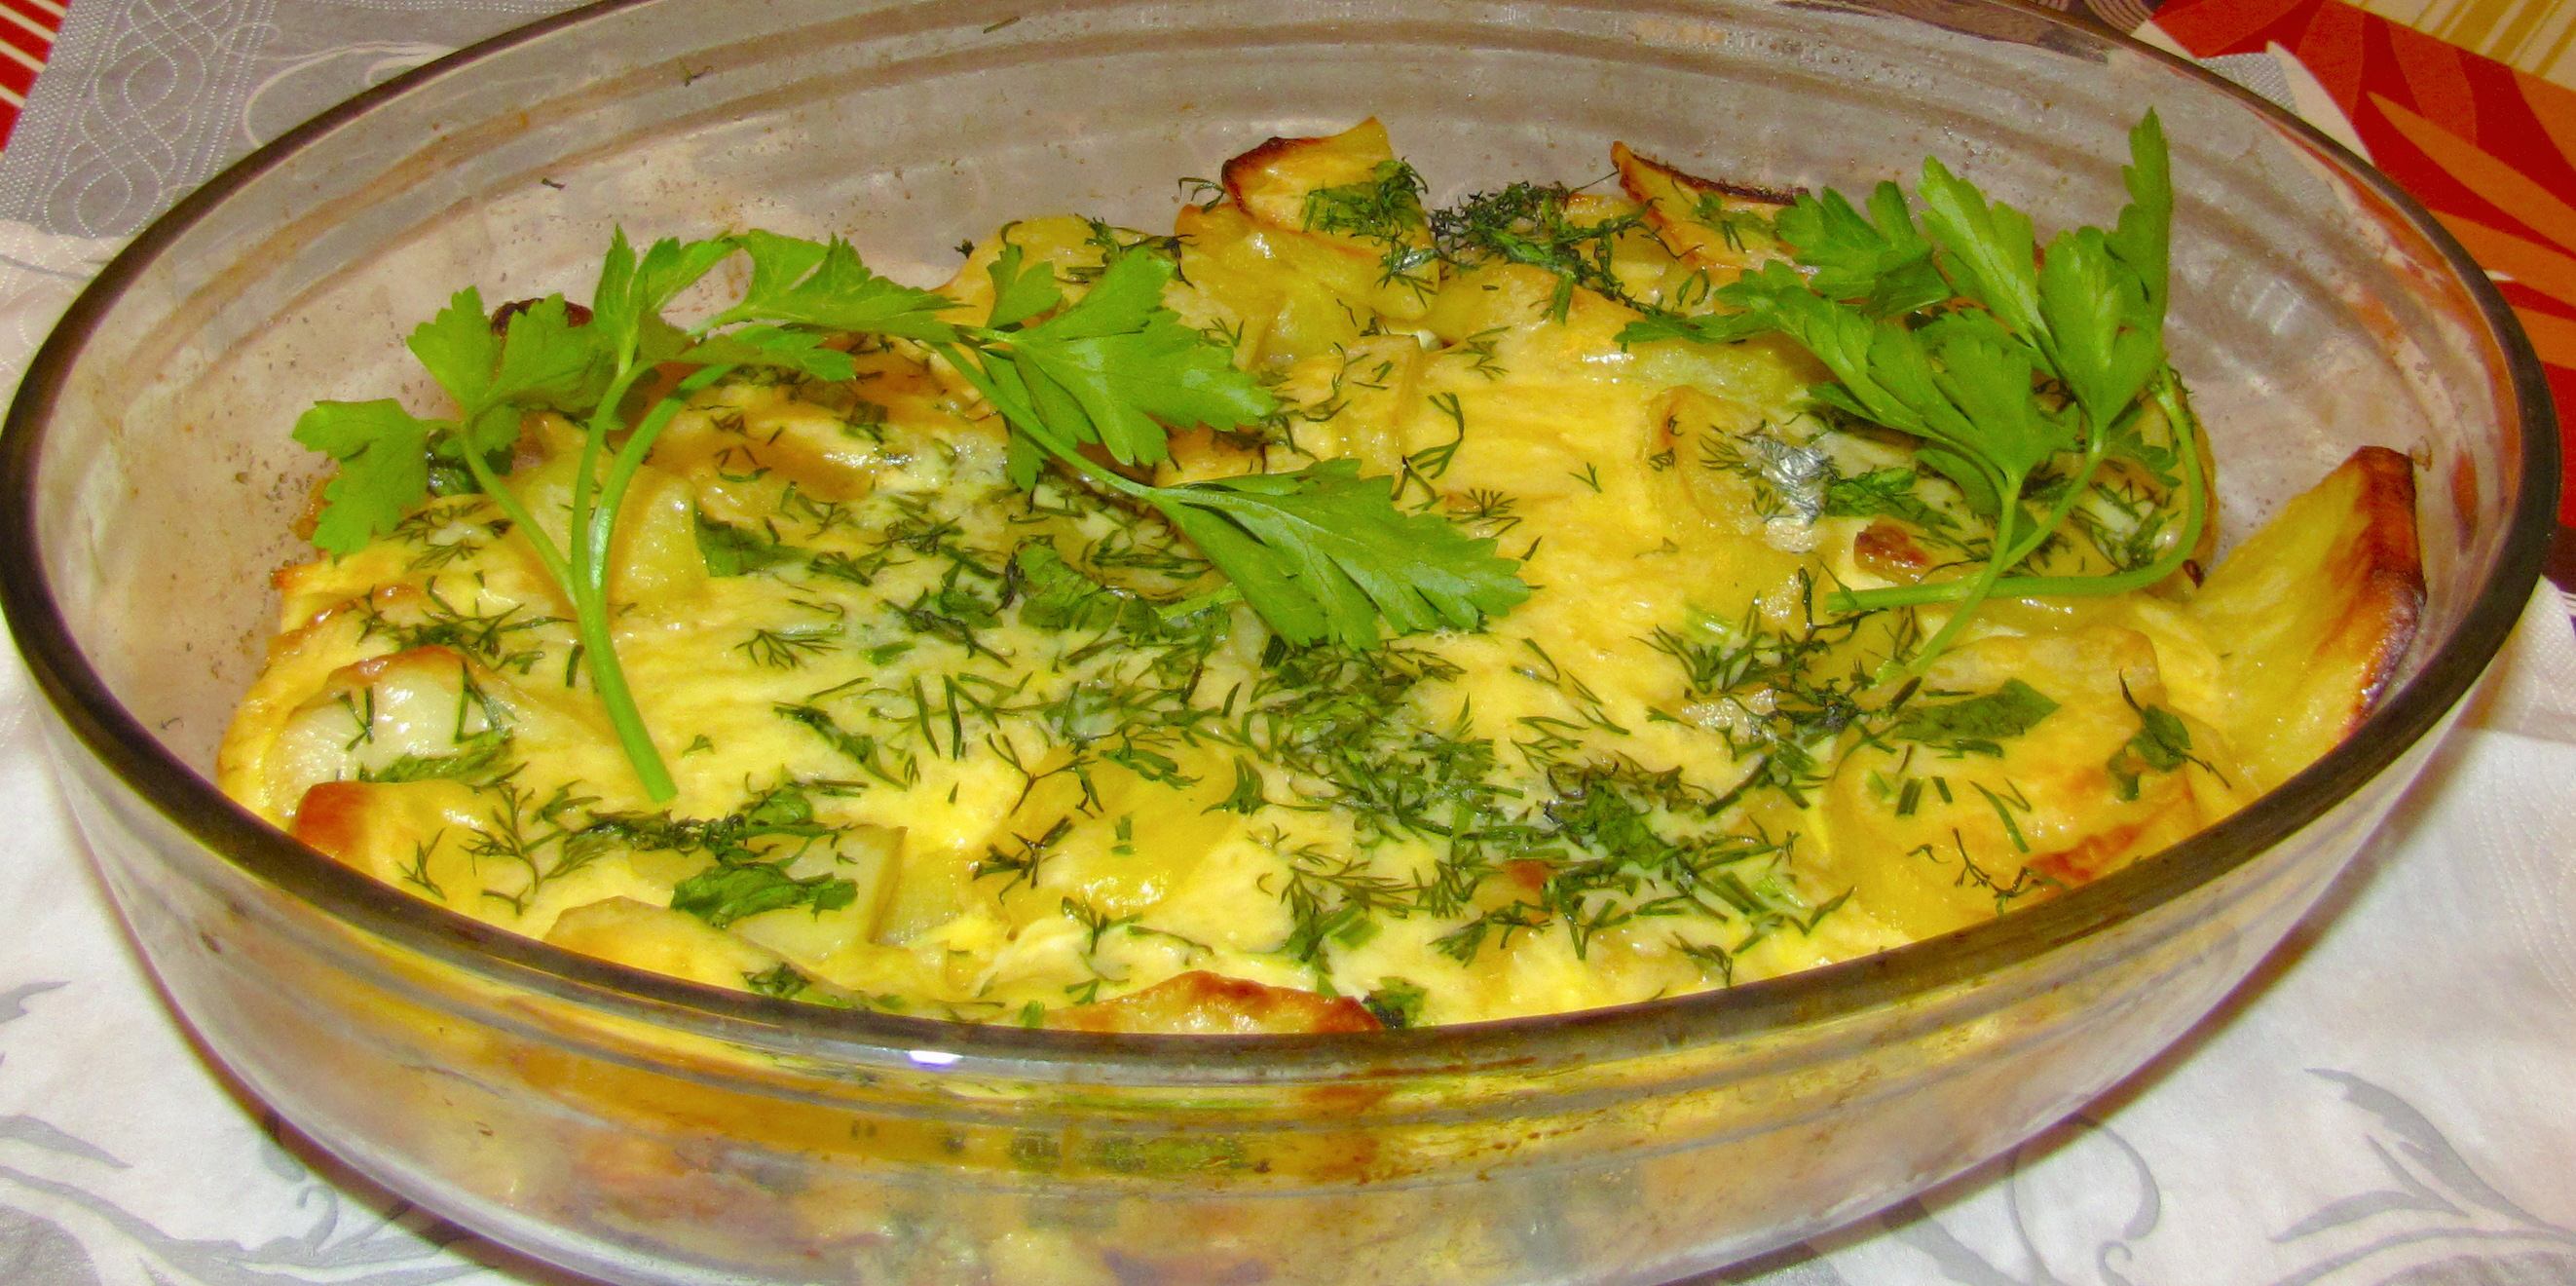 Baked potatoes with eggs recipe